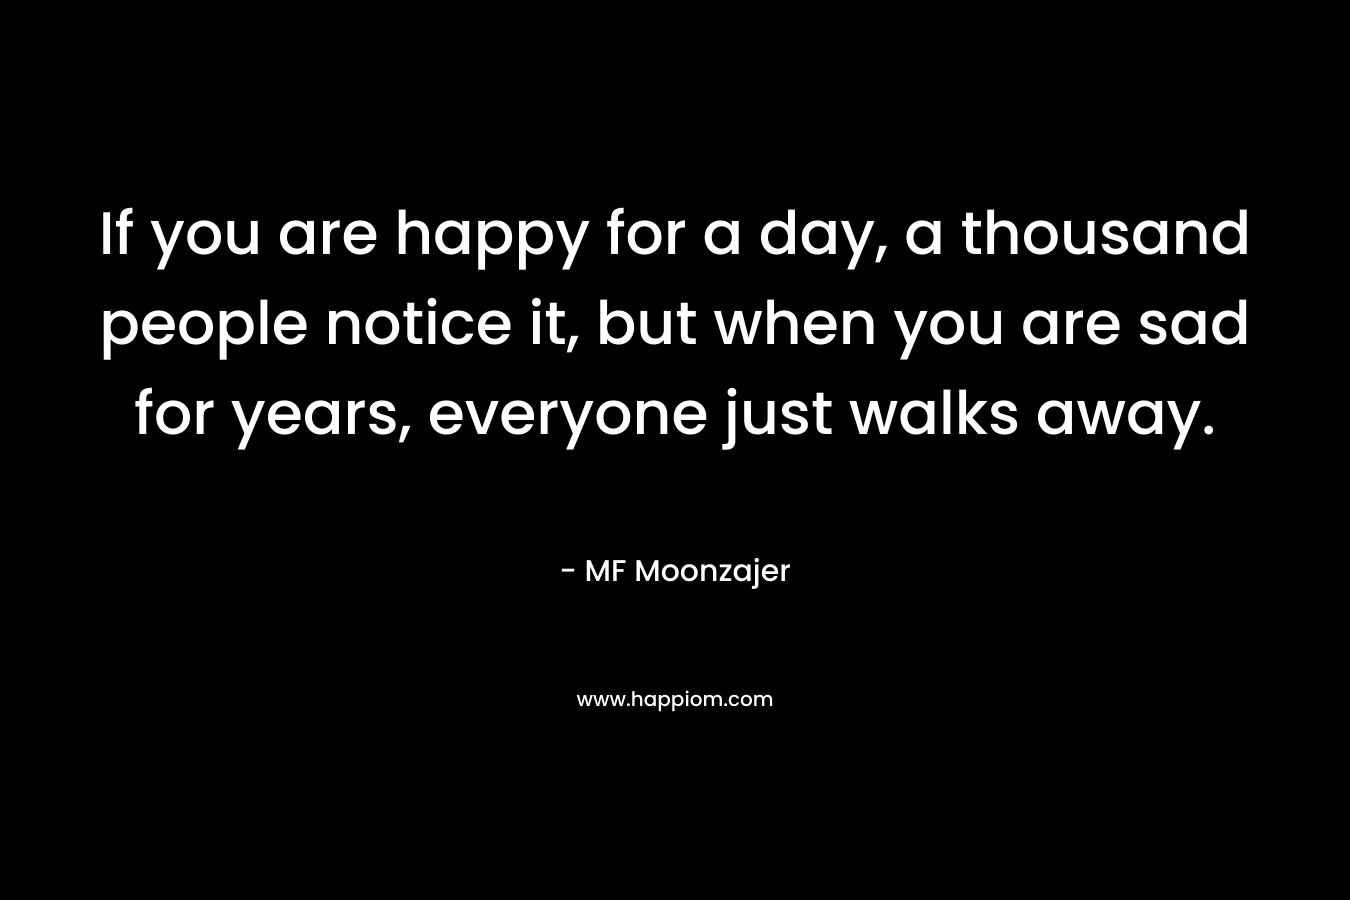 If you are happy for a day, a thousand people notice it, but when you are sad for years, everyone just walks away.